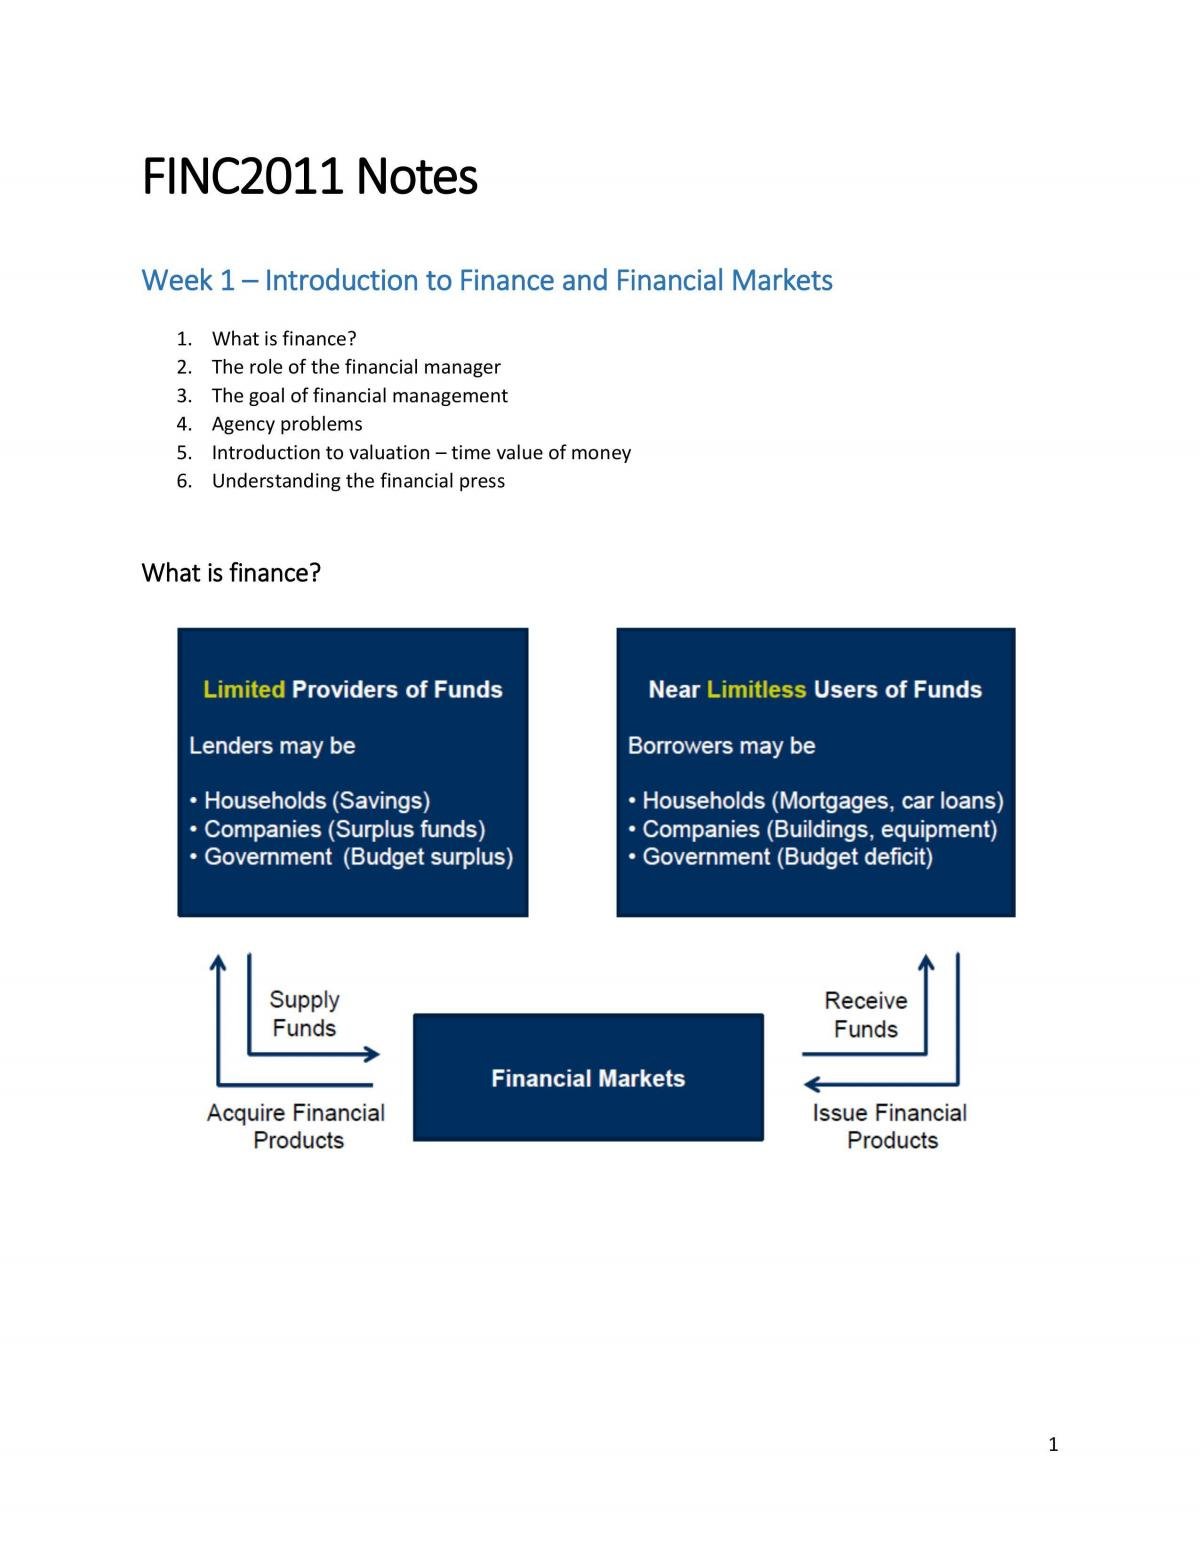 FINC2011 - Corporate Finance 1 Notes - Page 1